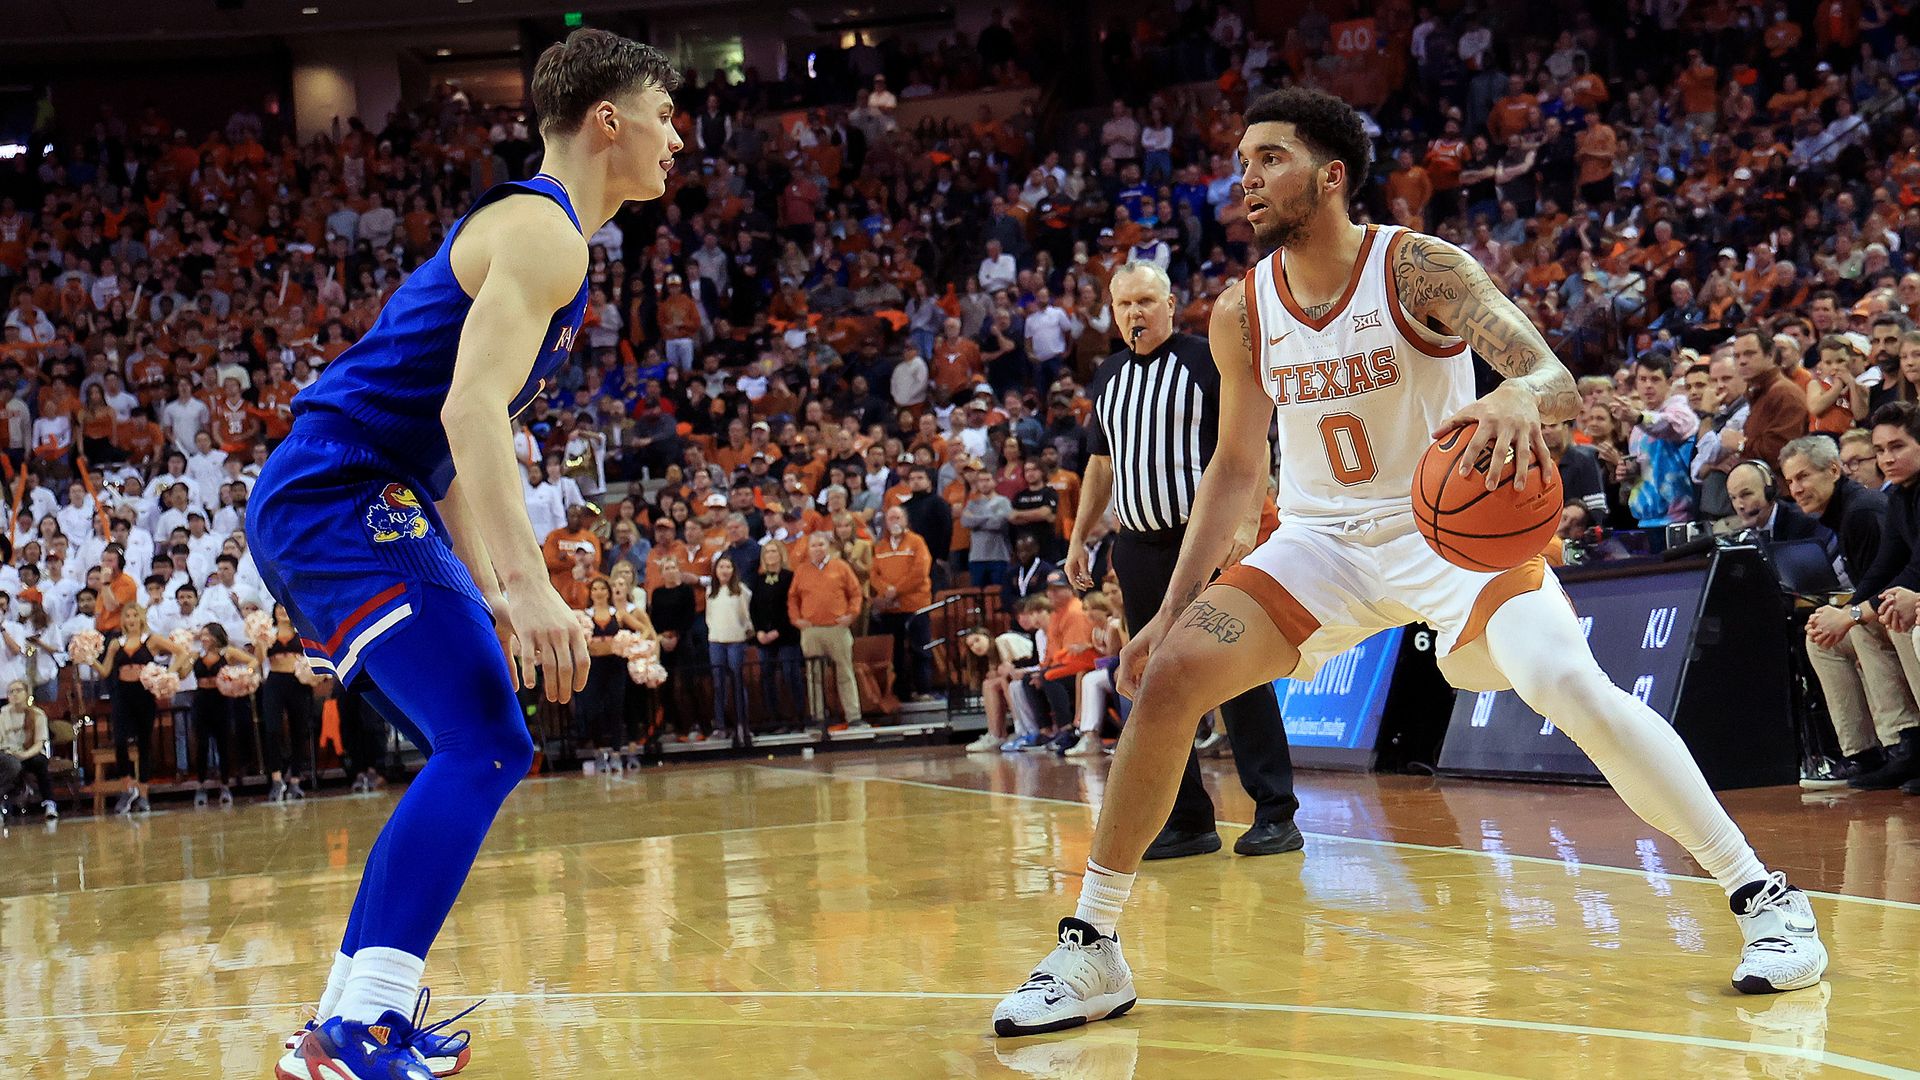 UT and Kansas basketball players square off on the court.